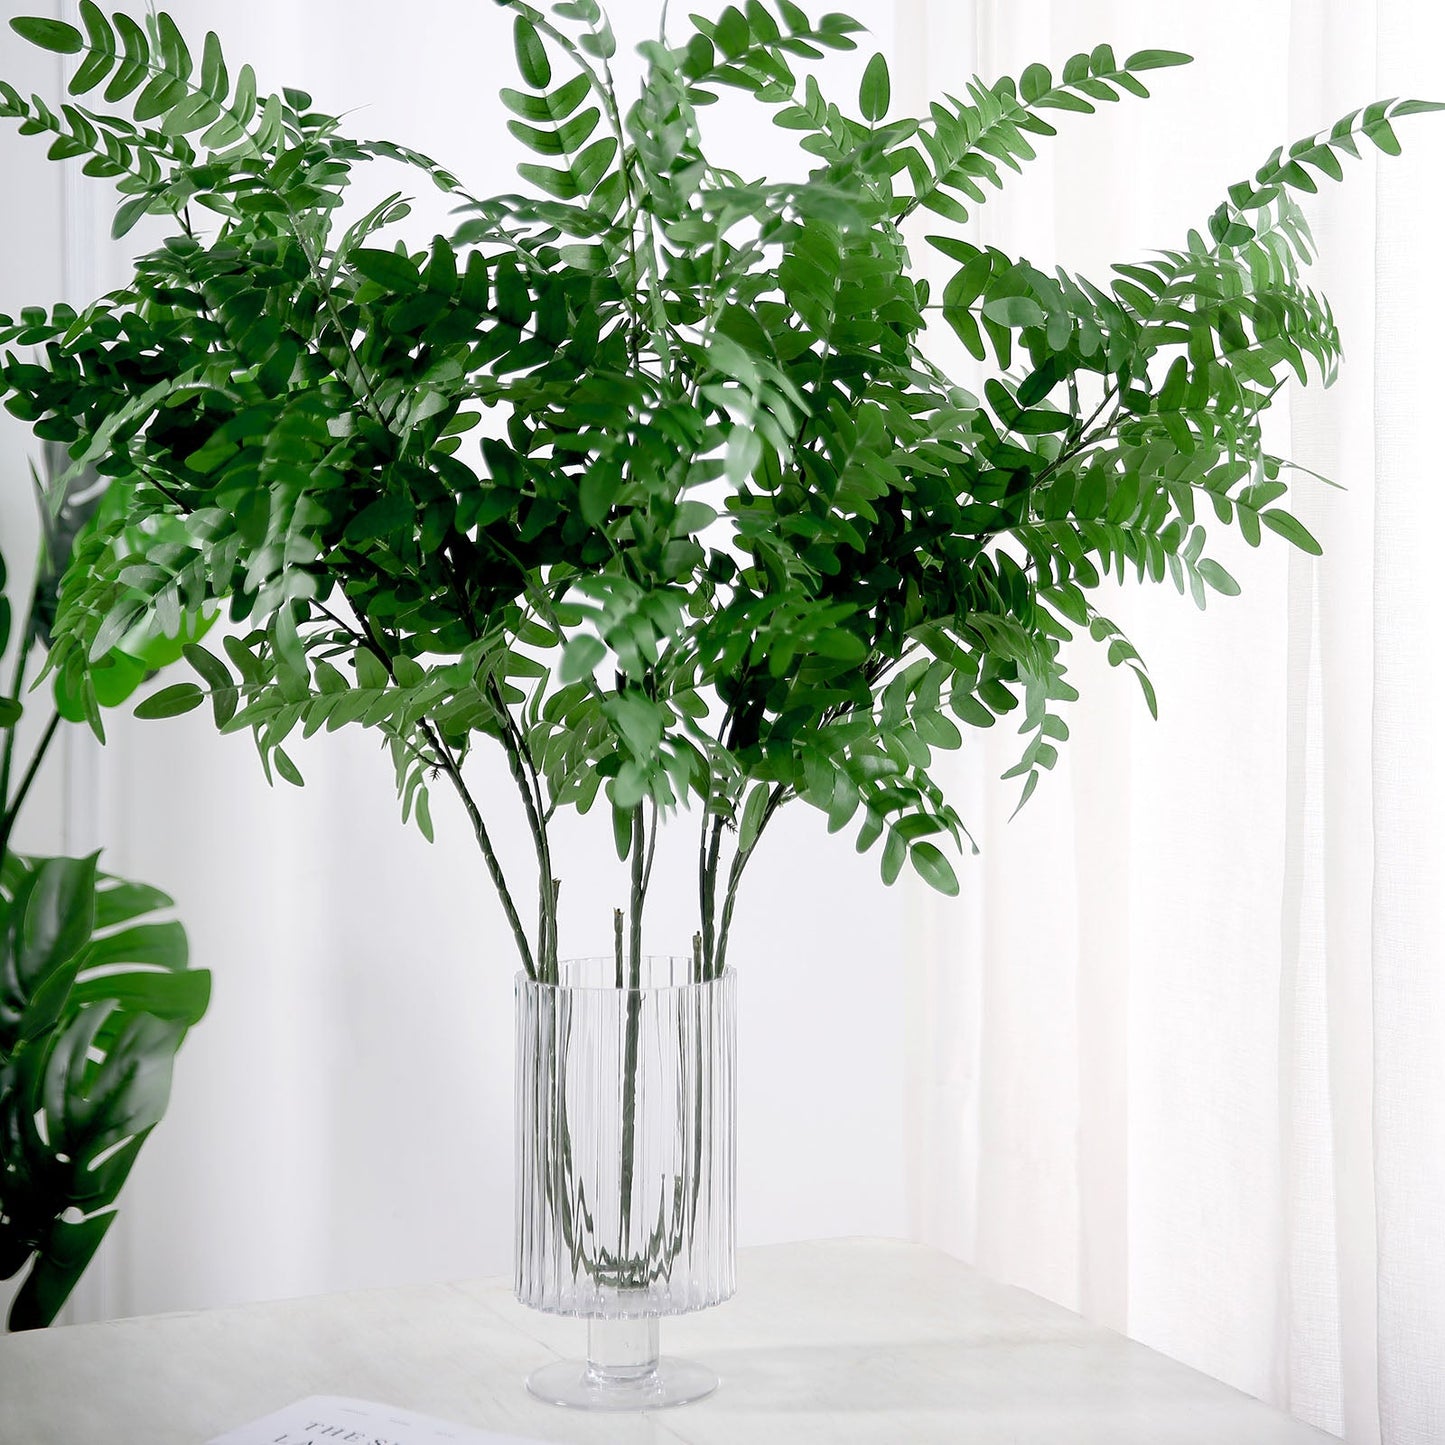 2 Bushes Light Green Artificial Silk Plant Stem Vase Fillers, Faux Honey Locust Branches 42" Tall